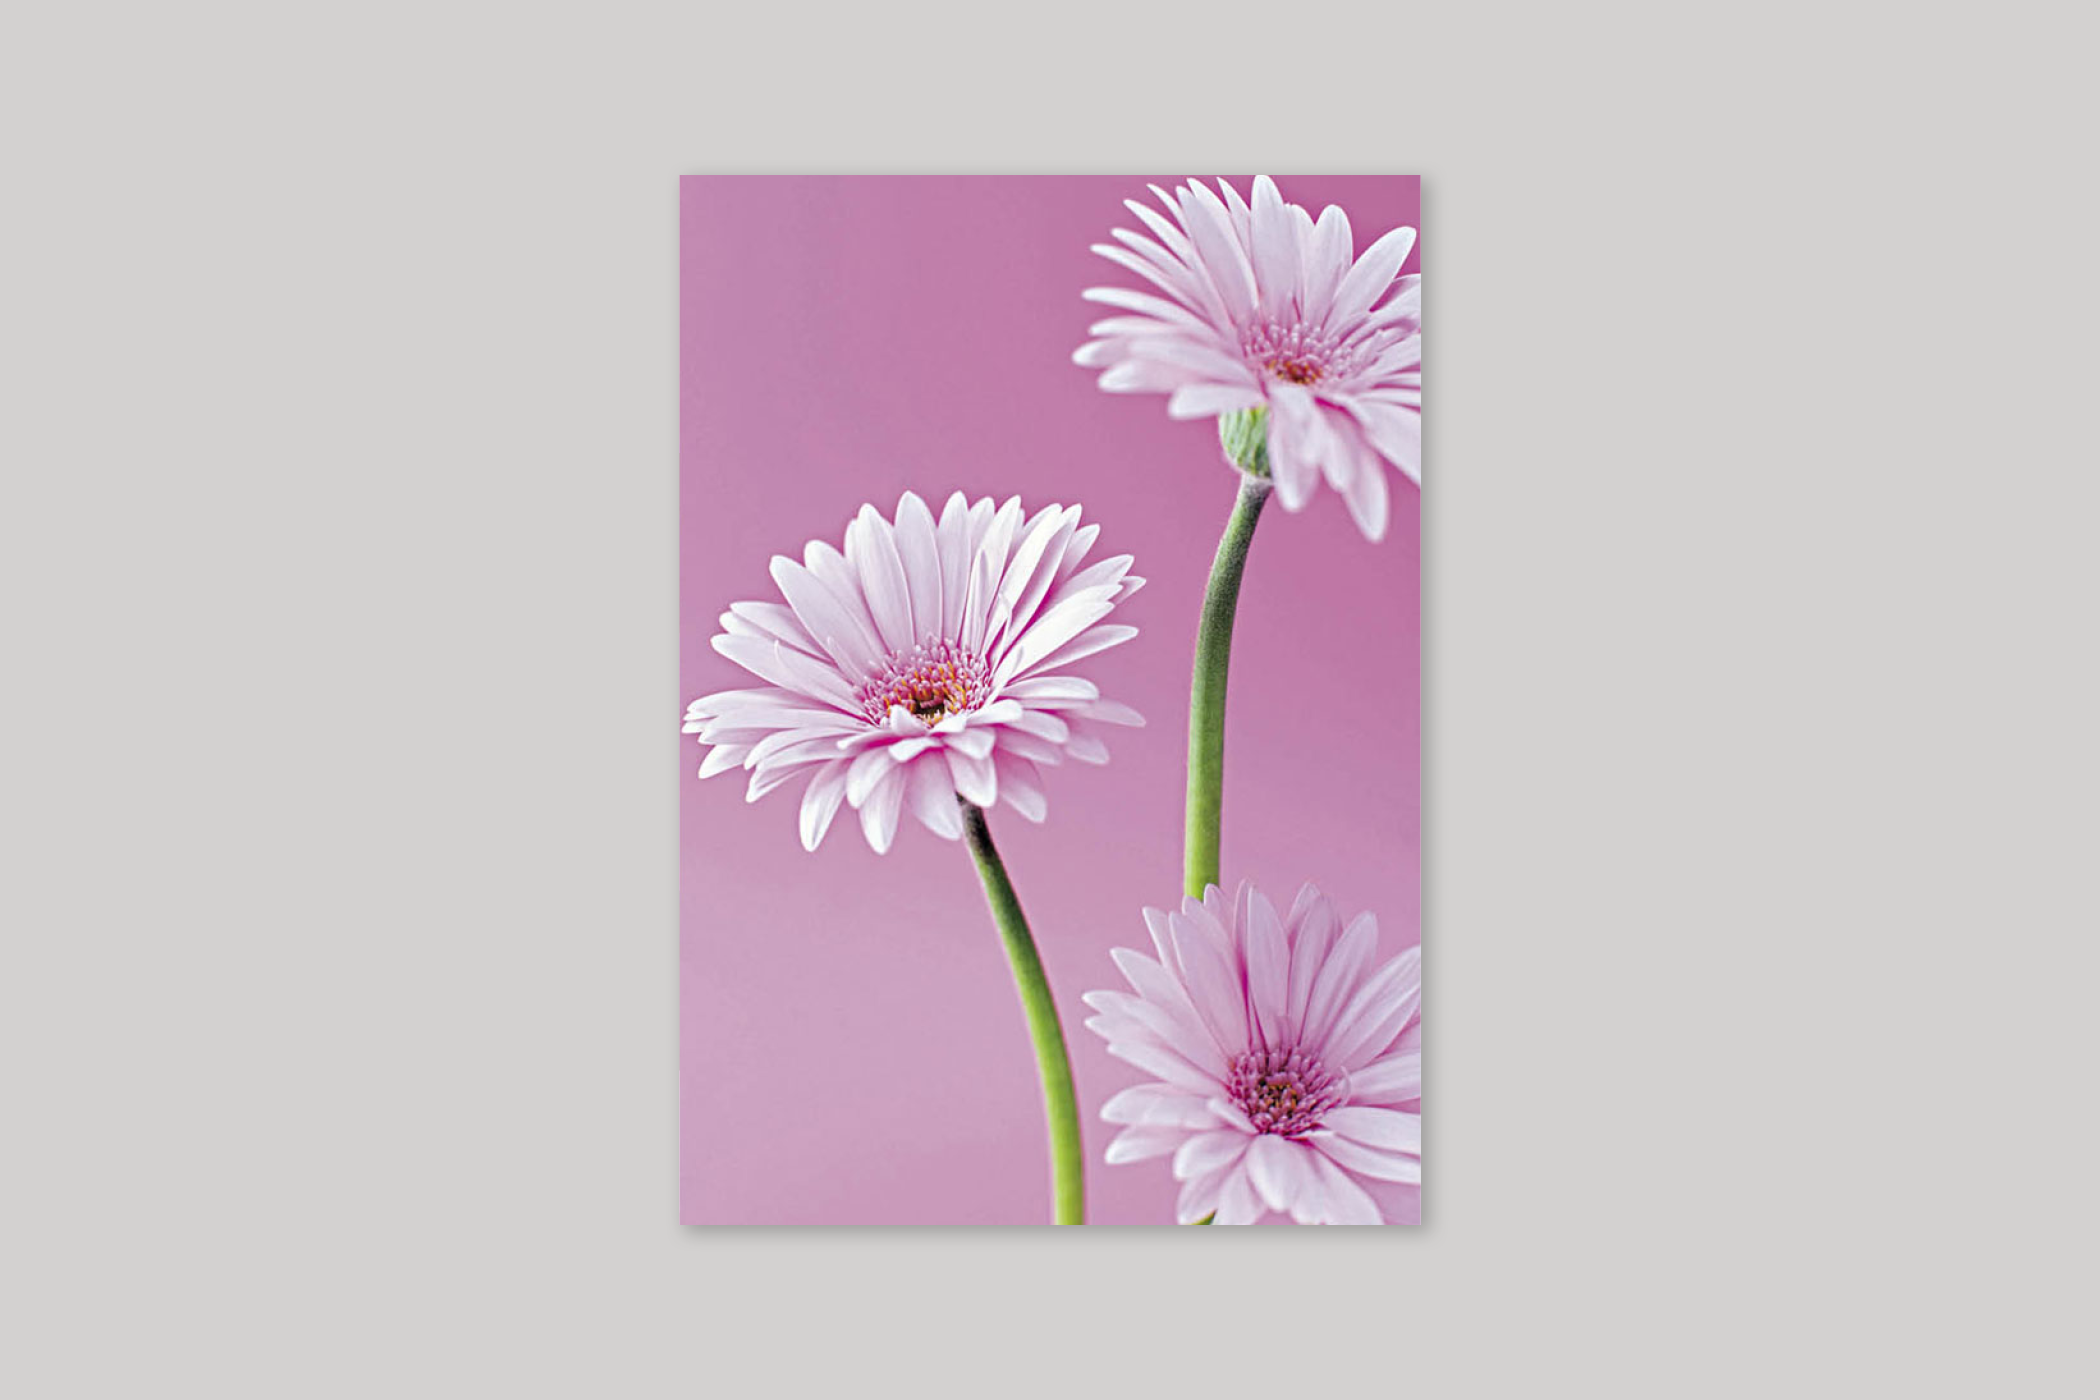 Gerberas thank you card from Exposure range of photographic cards by Icon.